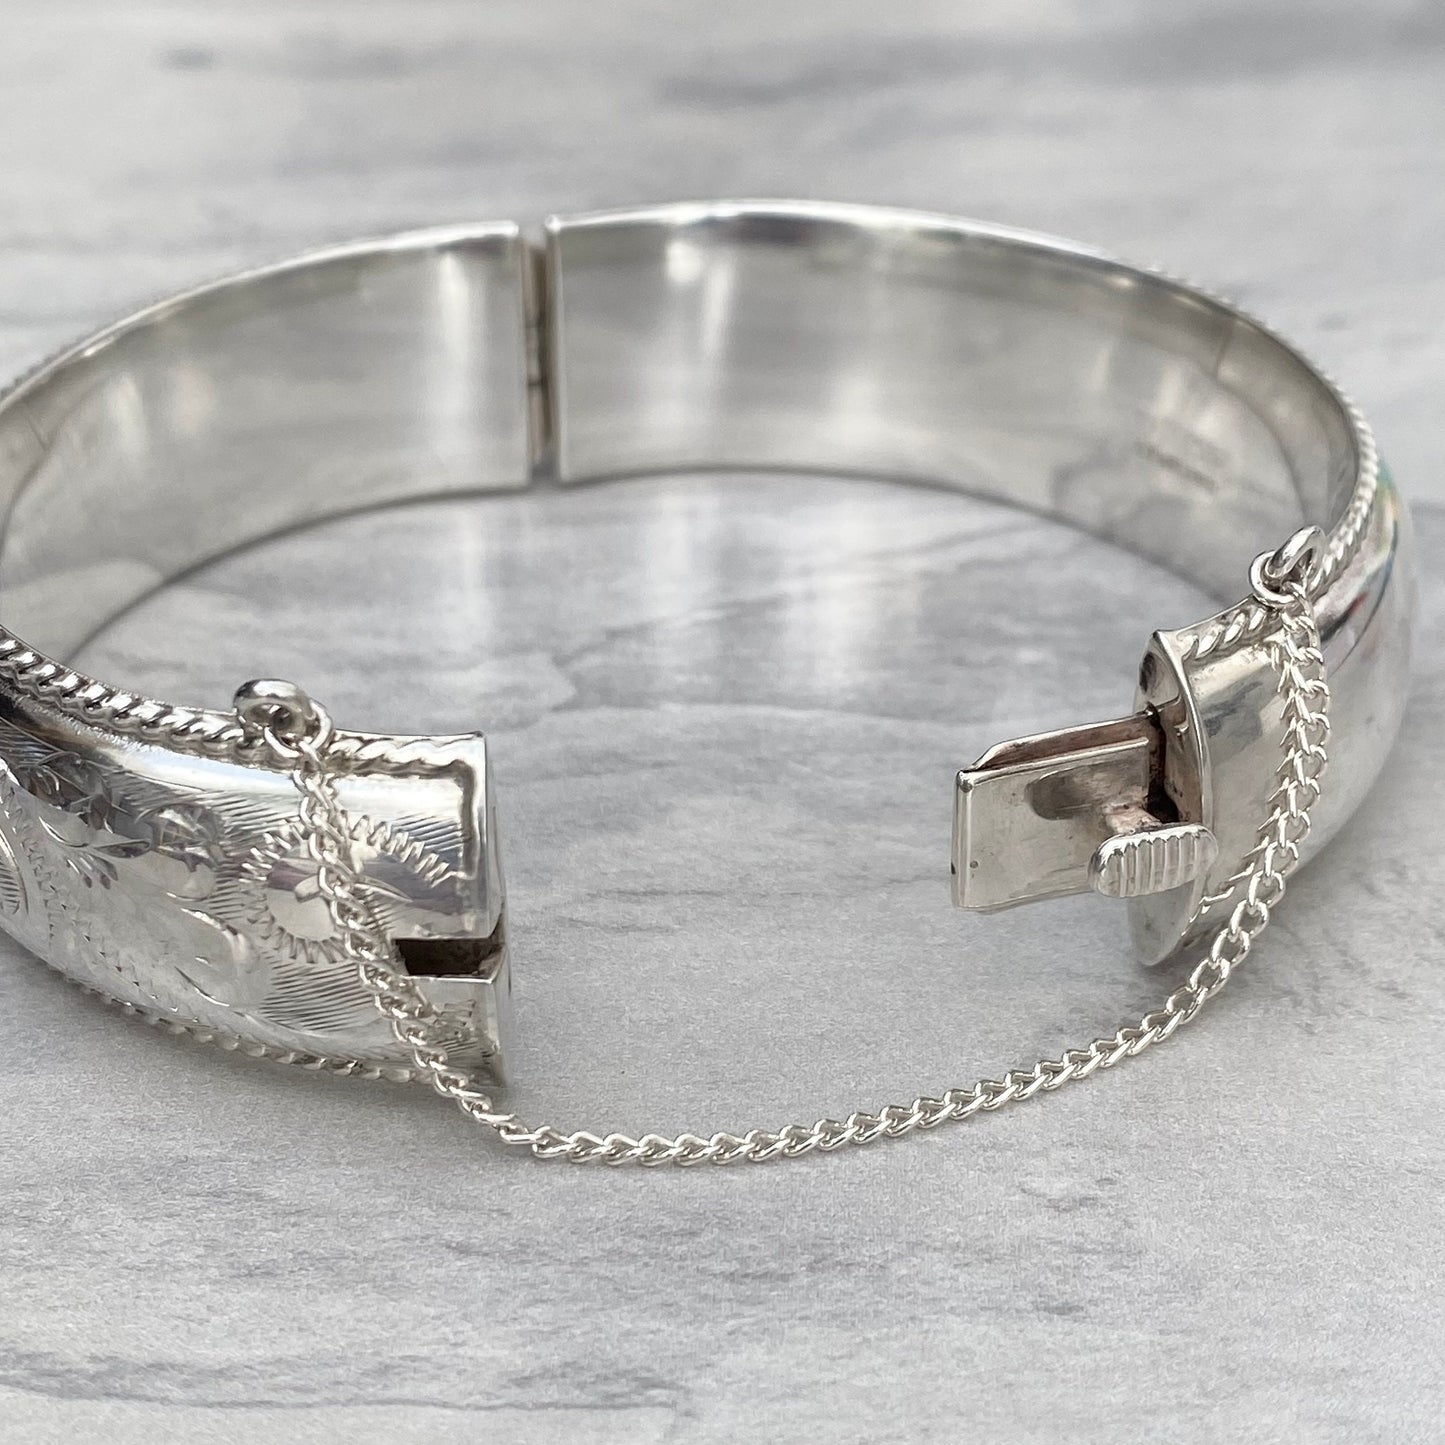 Vintage sterling silver engraved cuff bangle - 1970s